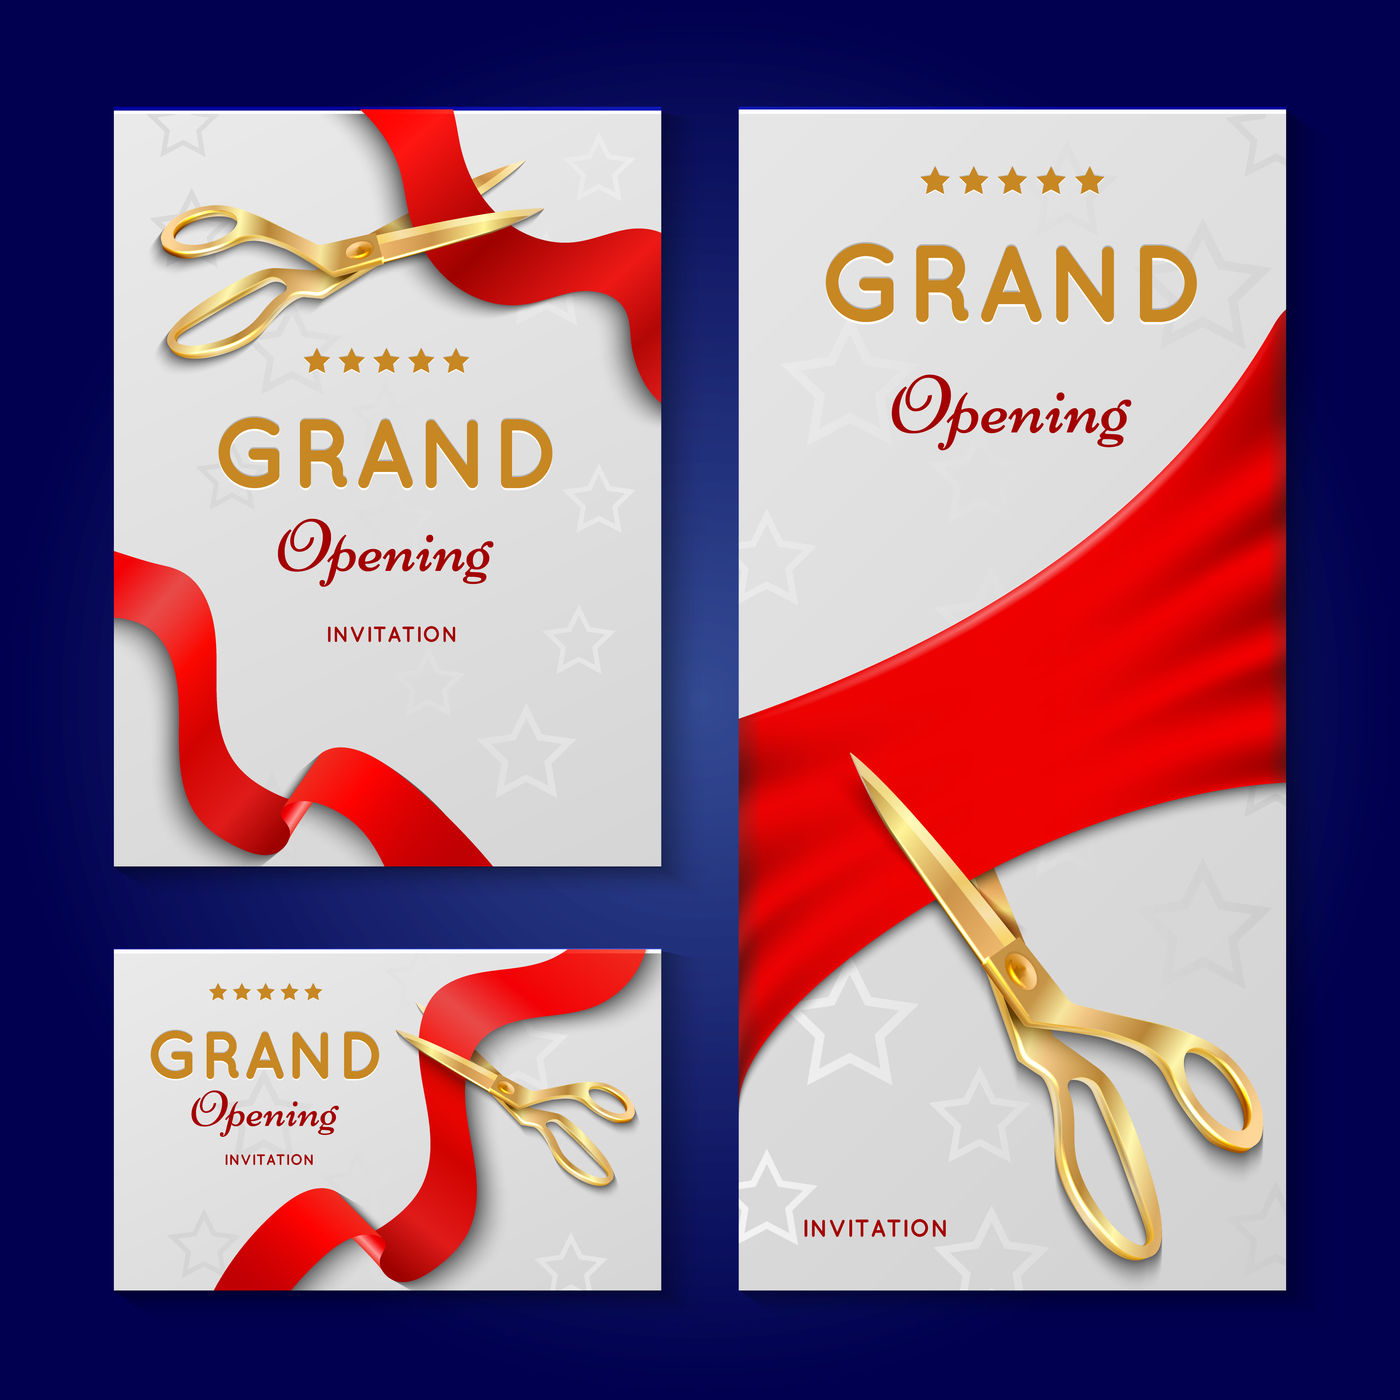 Ribbon cutting with scissors grand opening ceremony vector invitation